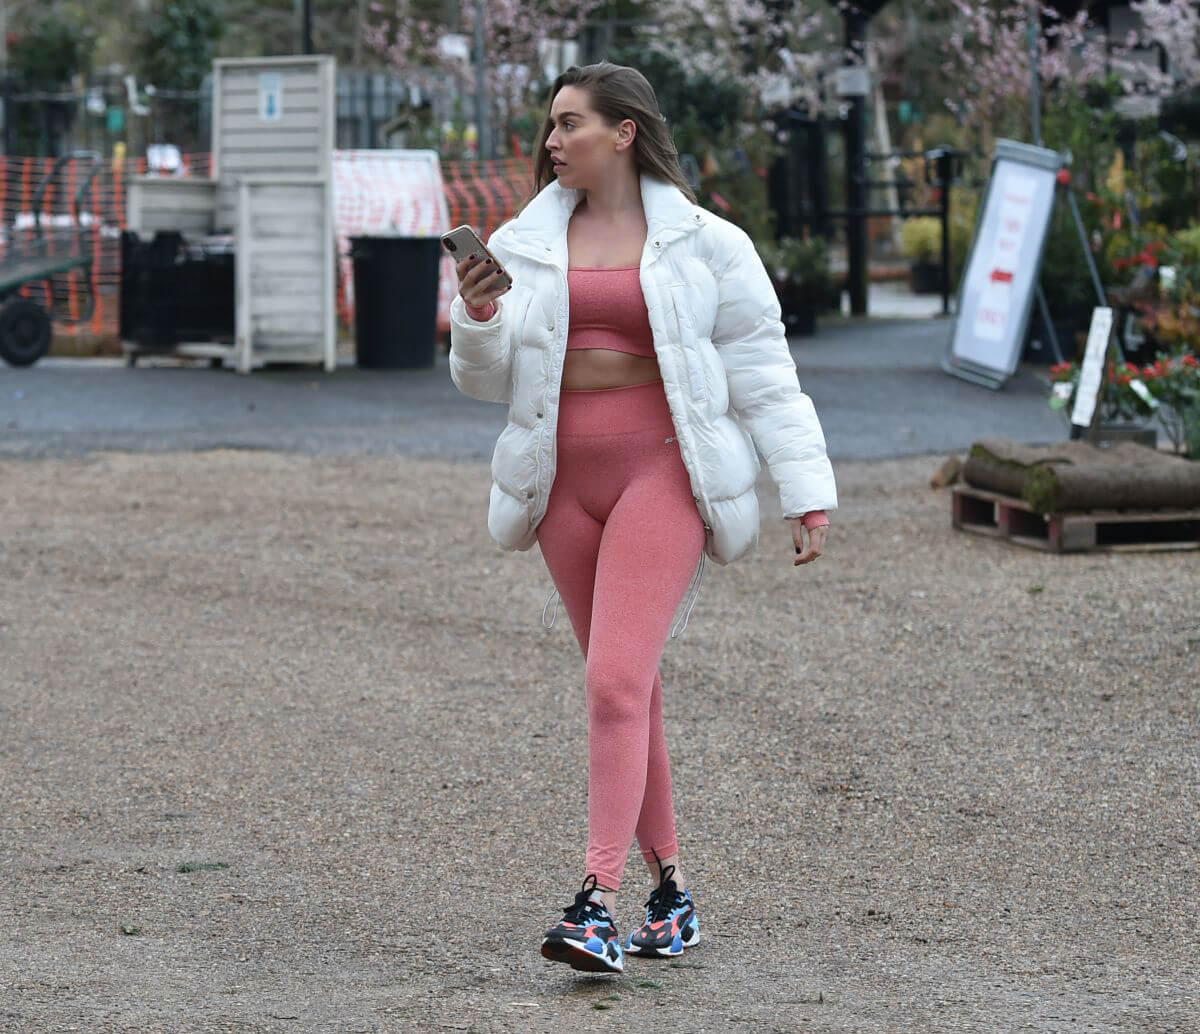 Chloe Ross in Pink Tights Out Shopping at Chigwell Garden Centre 11/25/2020